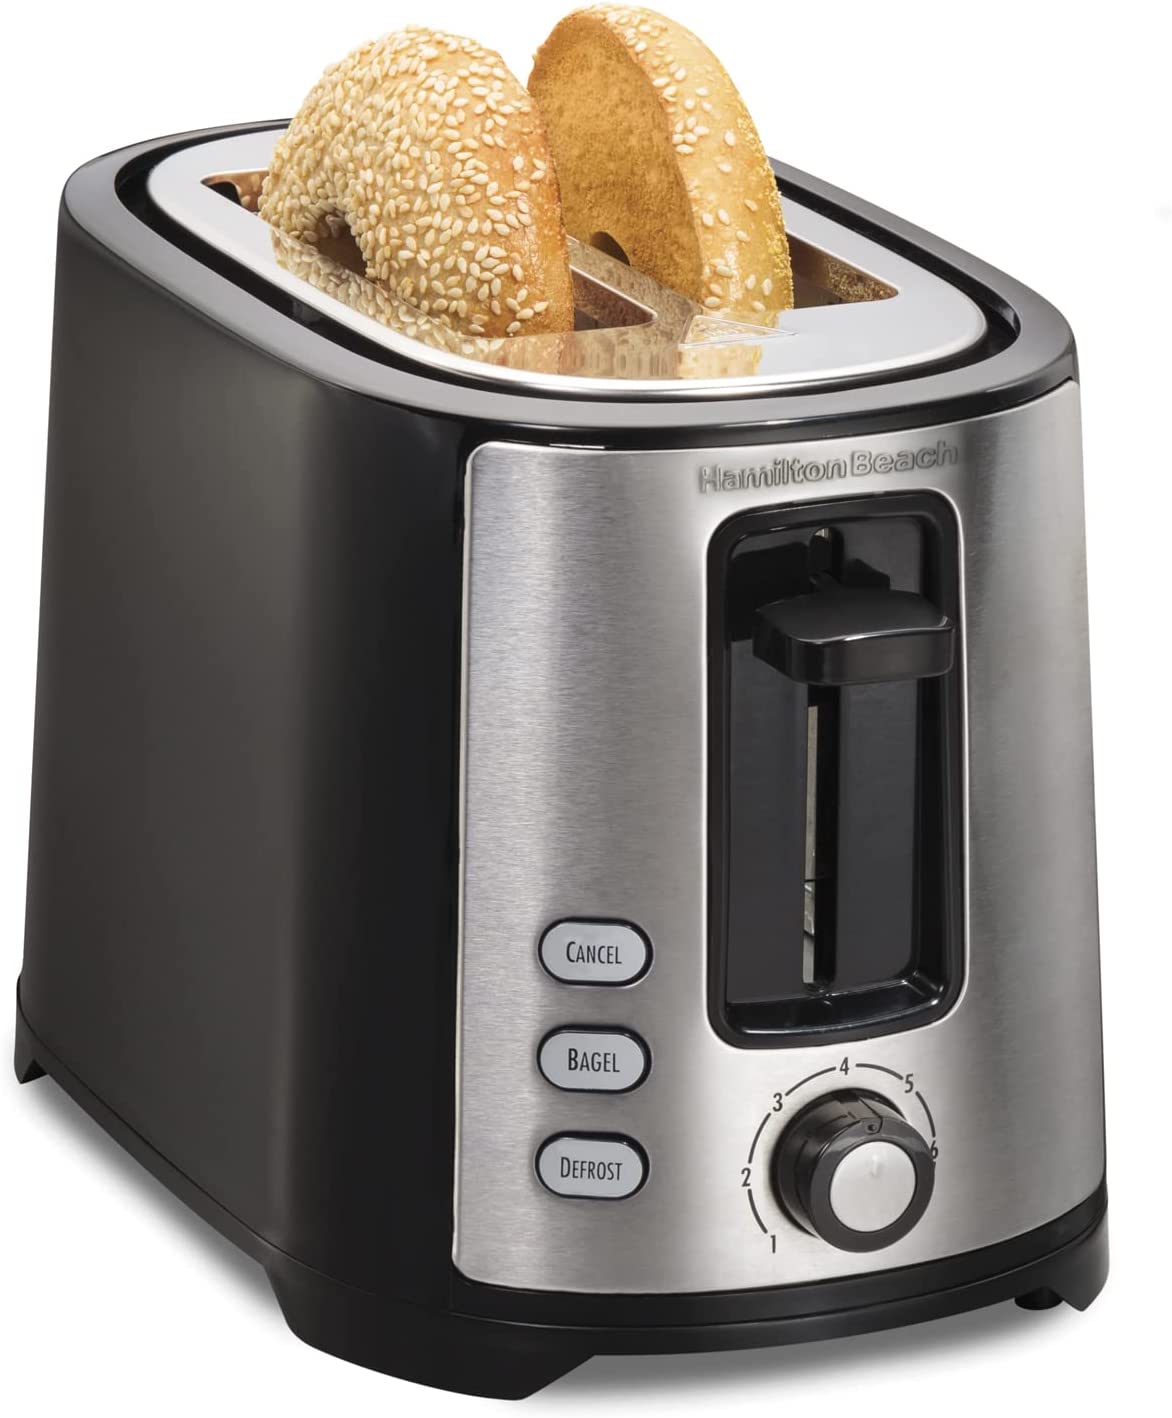 Hamilton Beach 2 Slice Extra Wide Slot Toaster with Bagel & Defrost Settings, Shade Selector, Toast Boost, Black & Stainless Steel